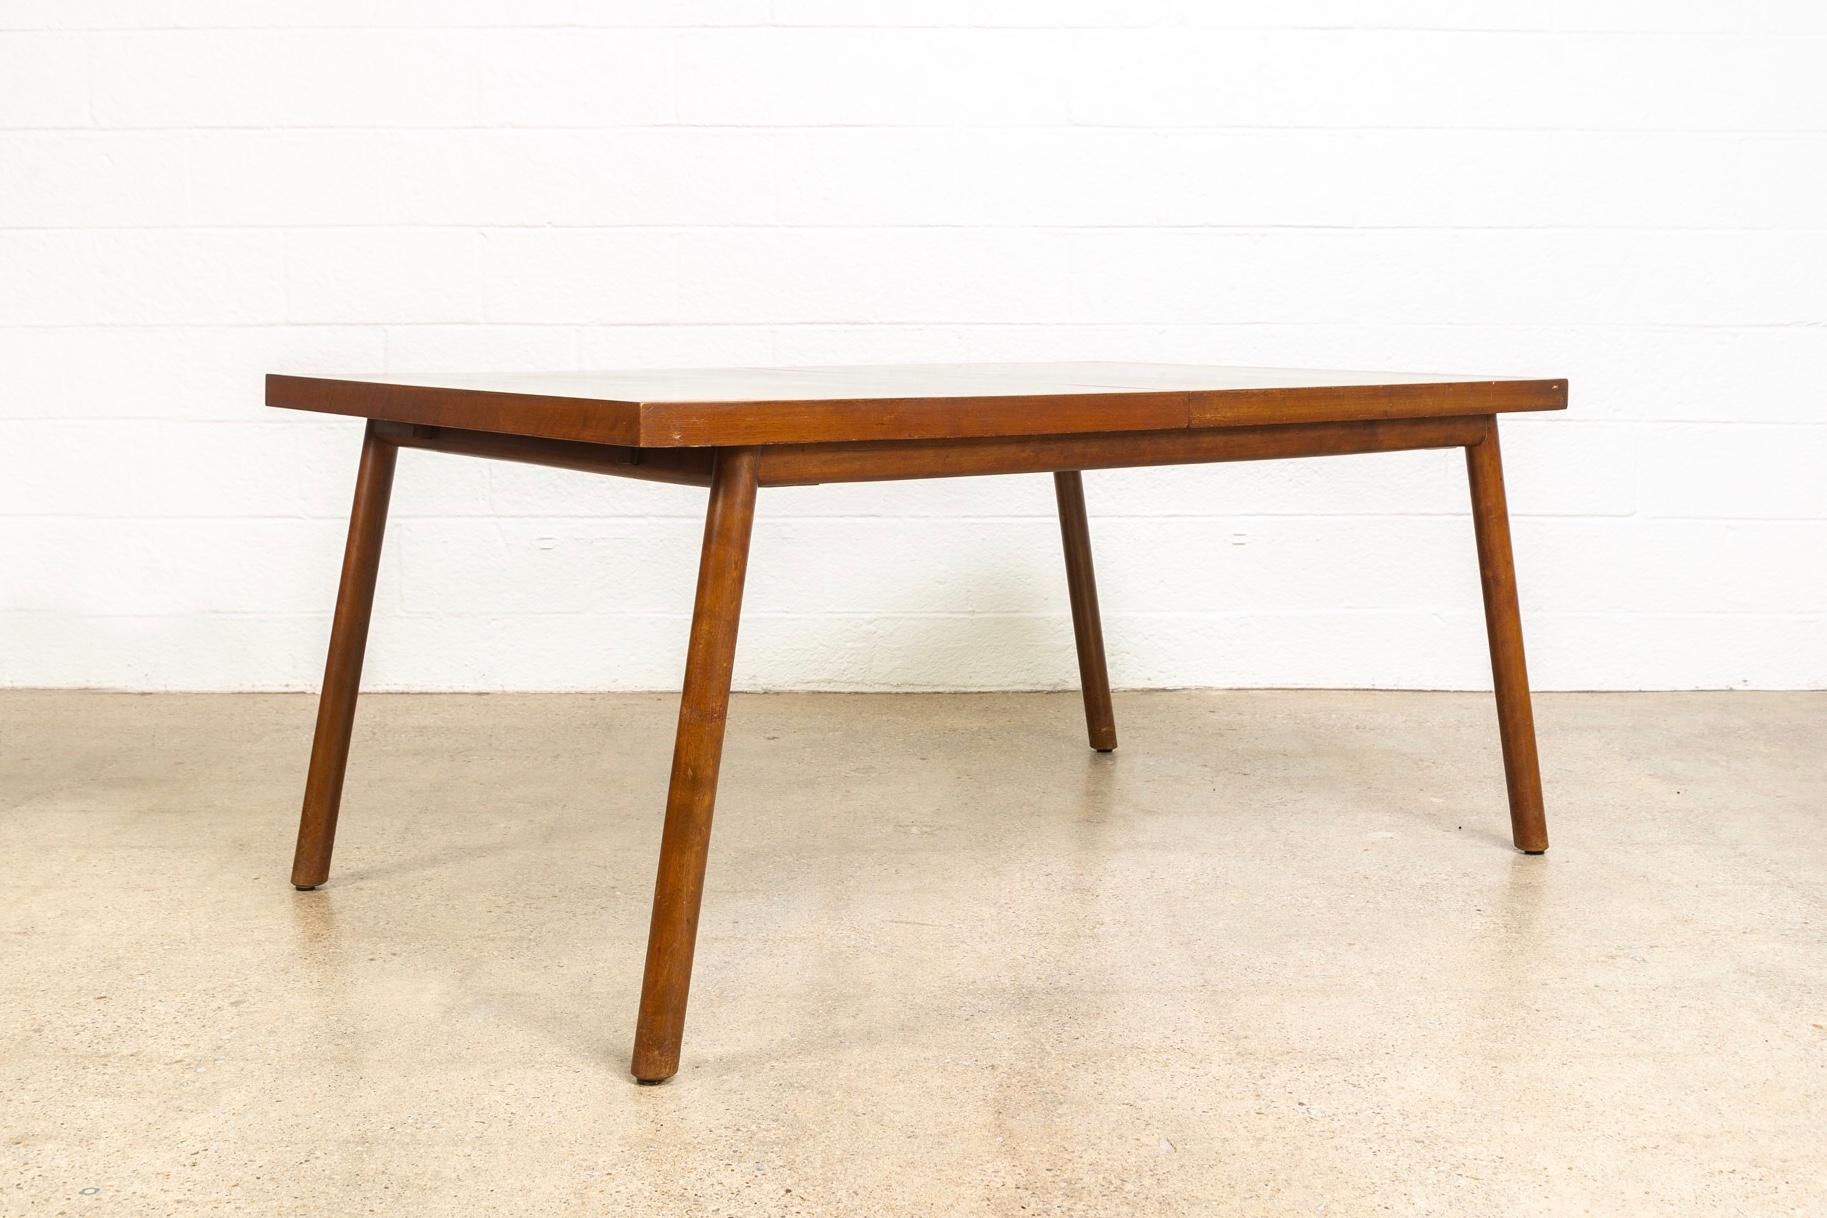 This vintage Mid-Century Modern dining table made in 1952 was designed by British-born T.H. Robsjohn-Gibbings and manufactured by Widdicomb. The table has an elegant Minimalist aesthetic and a clean, unimposing, rectilinear design featuring round